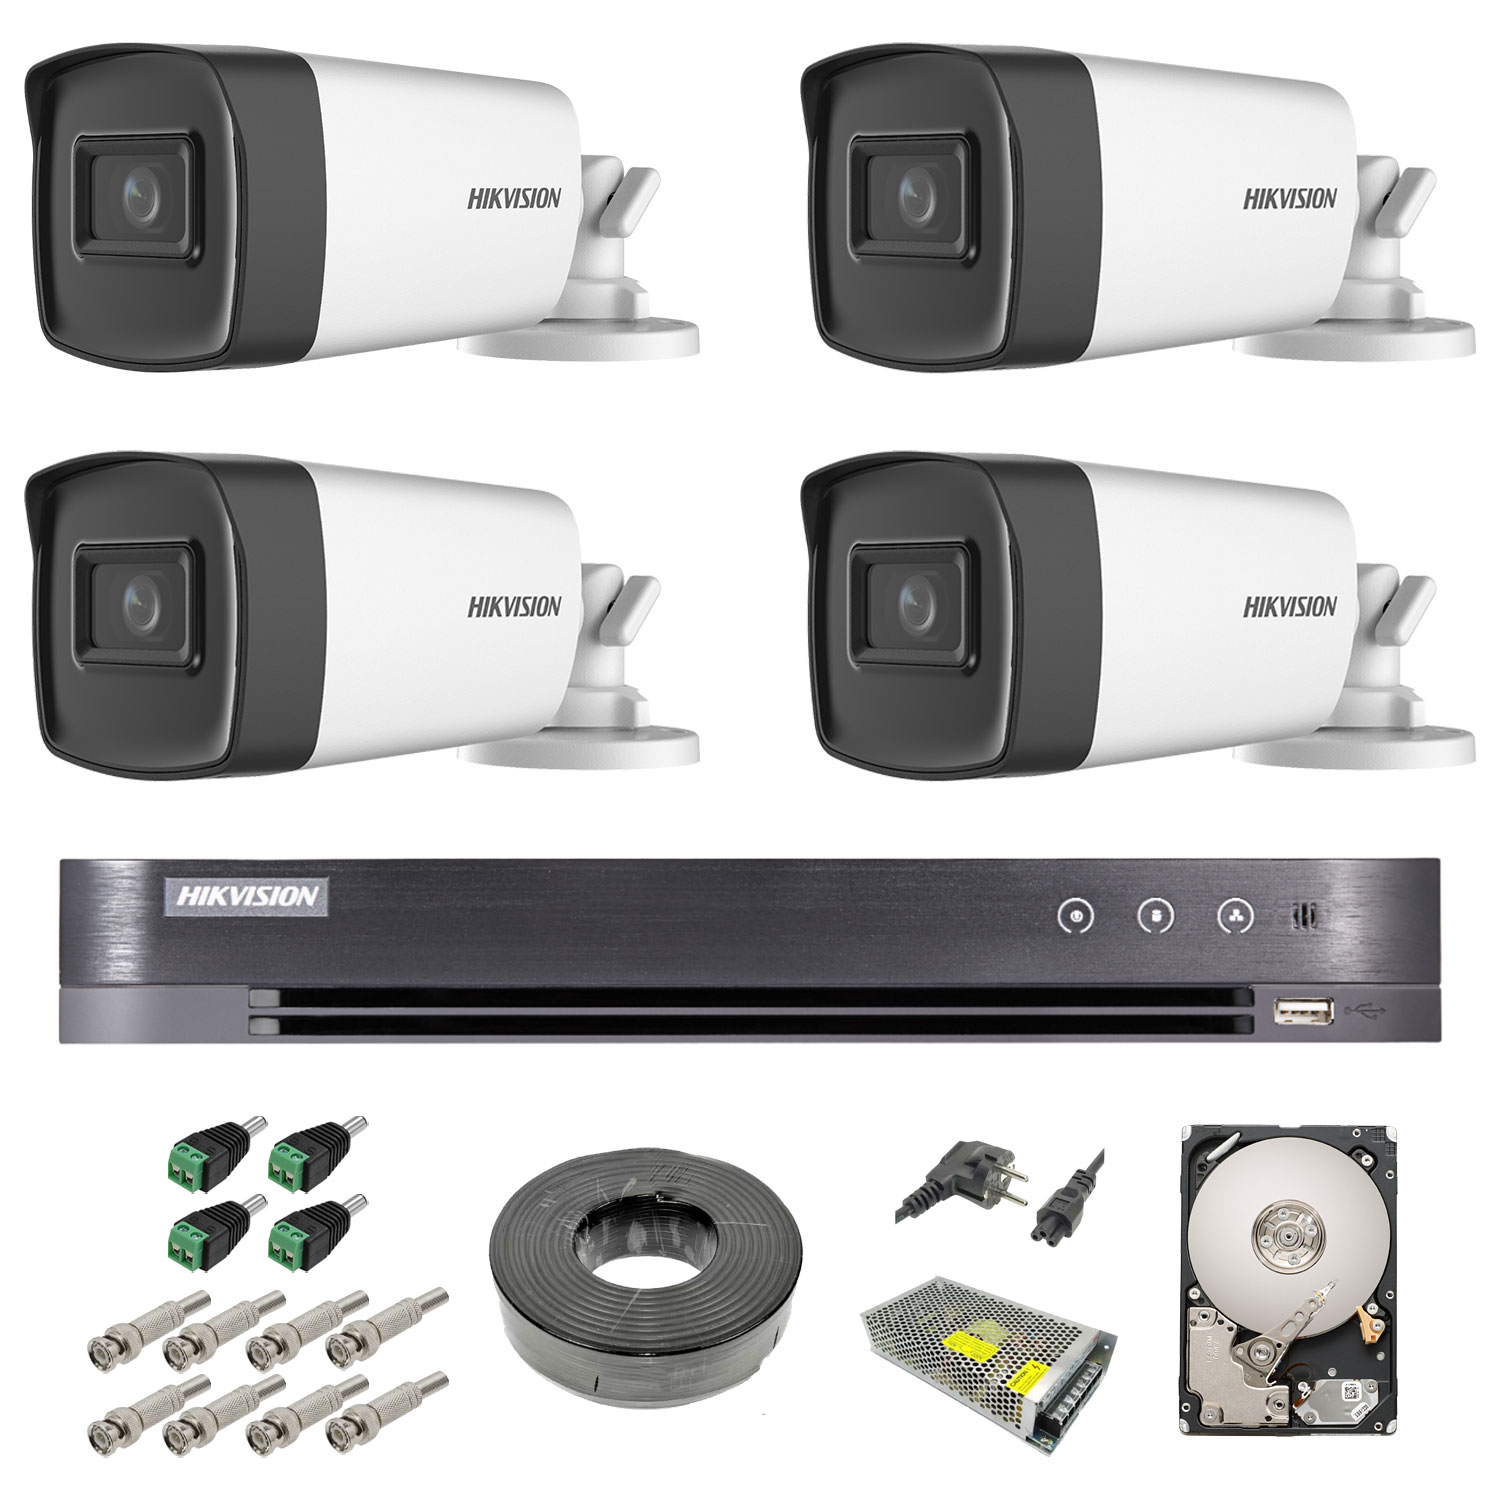 Missing Adjustment hiking Sistem supraveghere video exterior complet Hikvision 4 camere Turbo HD 5 MP  80 m IR cu toate accesoriile, HDD 1tb - Rovision - Camere Supraveghere,  Sisteme Alarma, Video Interfoane